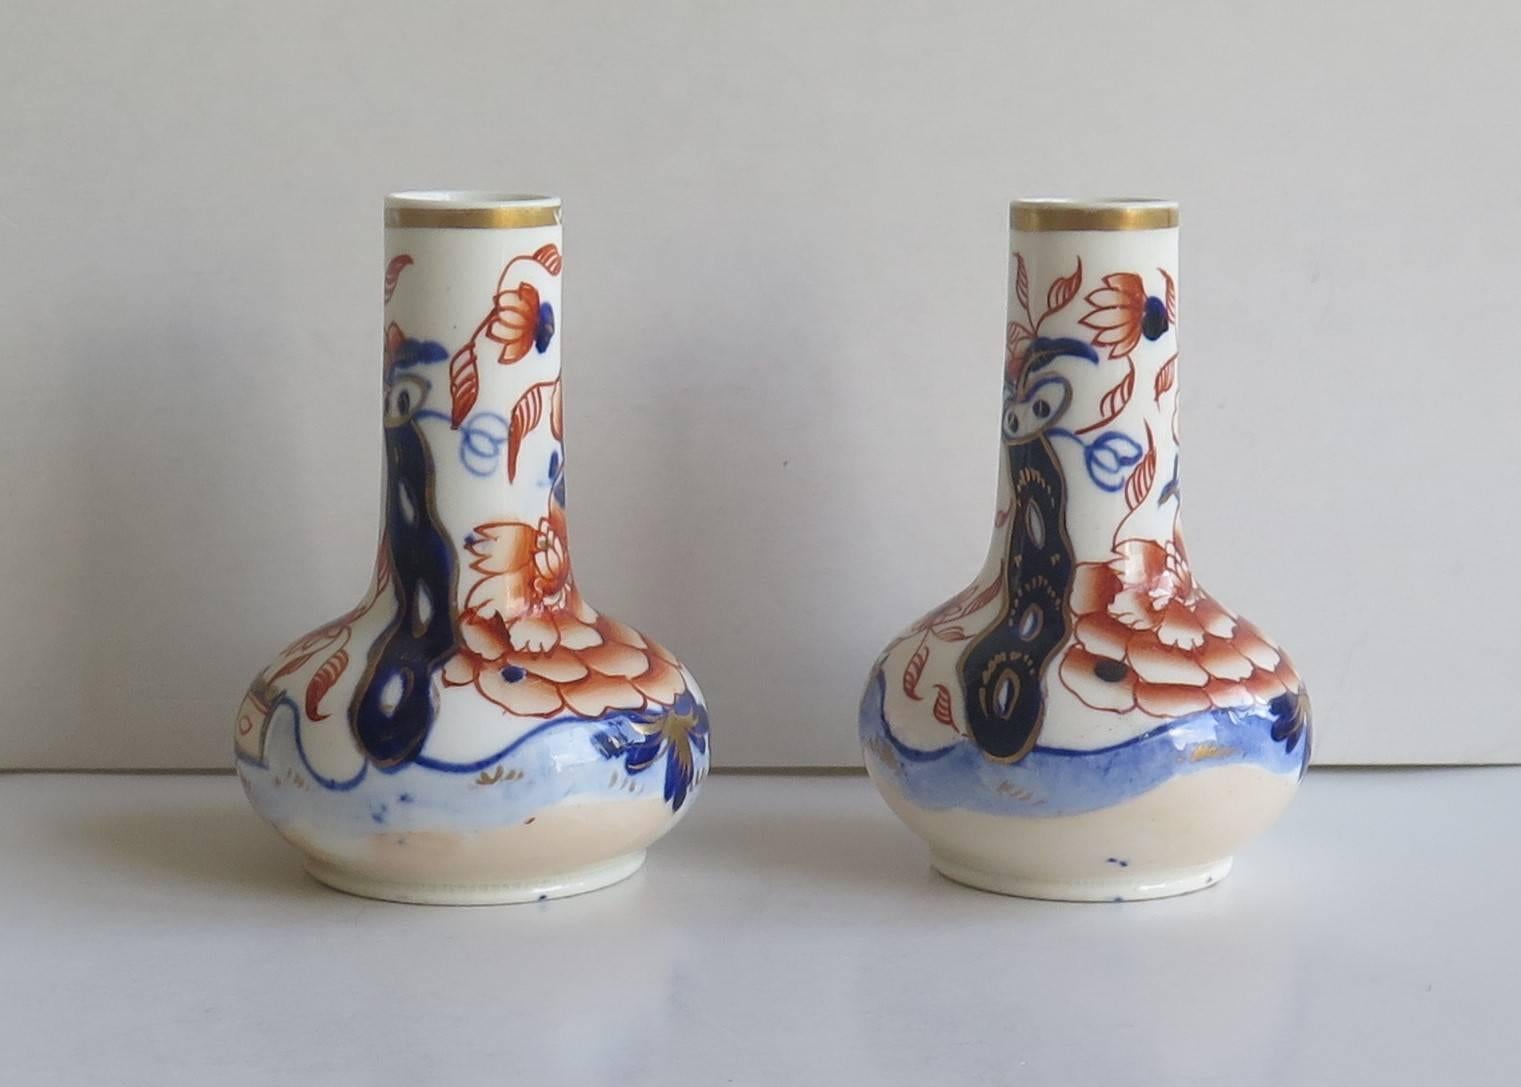 These are a beautiful pair of scent or perfume bottles made in porcelain by Mason's ( C J Mason) of Lane Delph, Staffordshire Potteries, England.

They are decorated in the Fence Japan pattern which is a well known Mason's pattern as shown on page